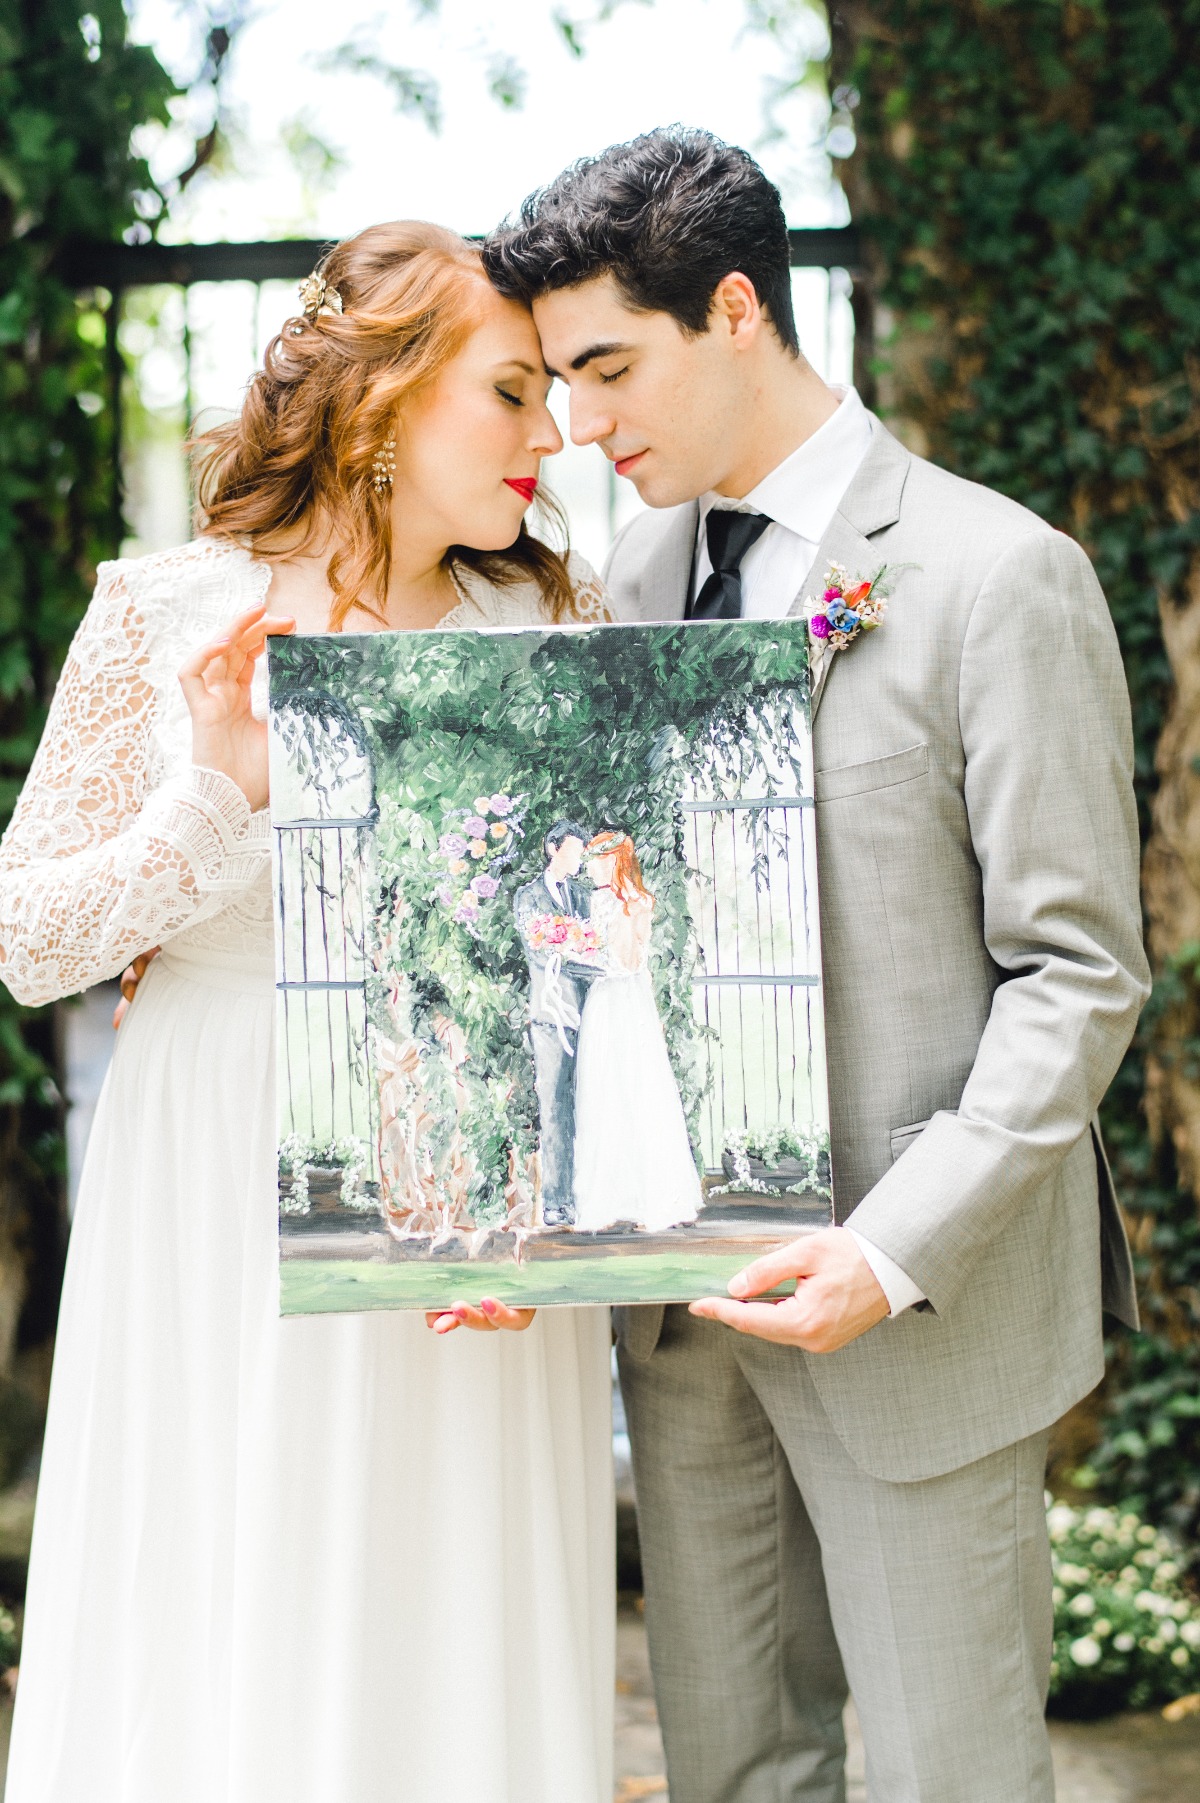 Live painting for your ceremony